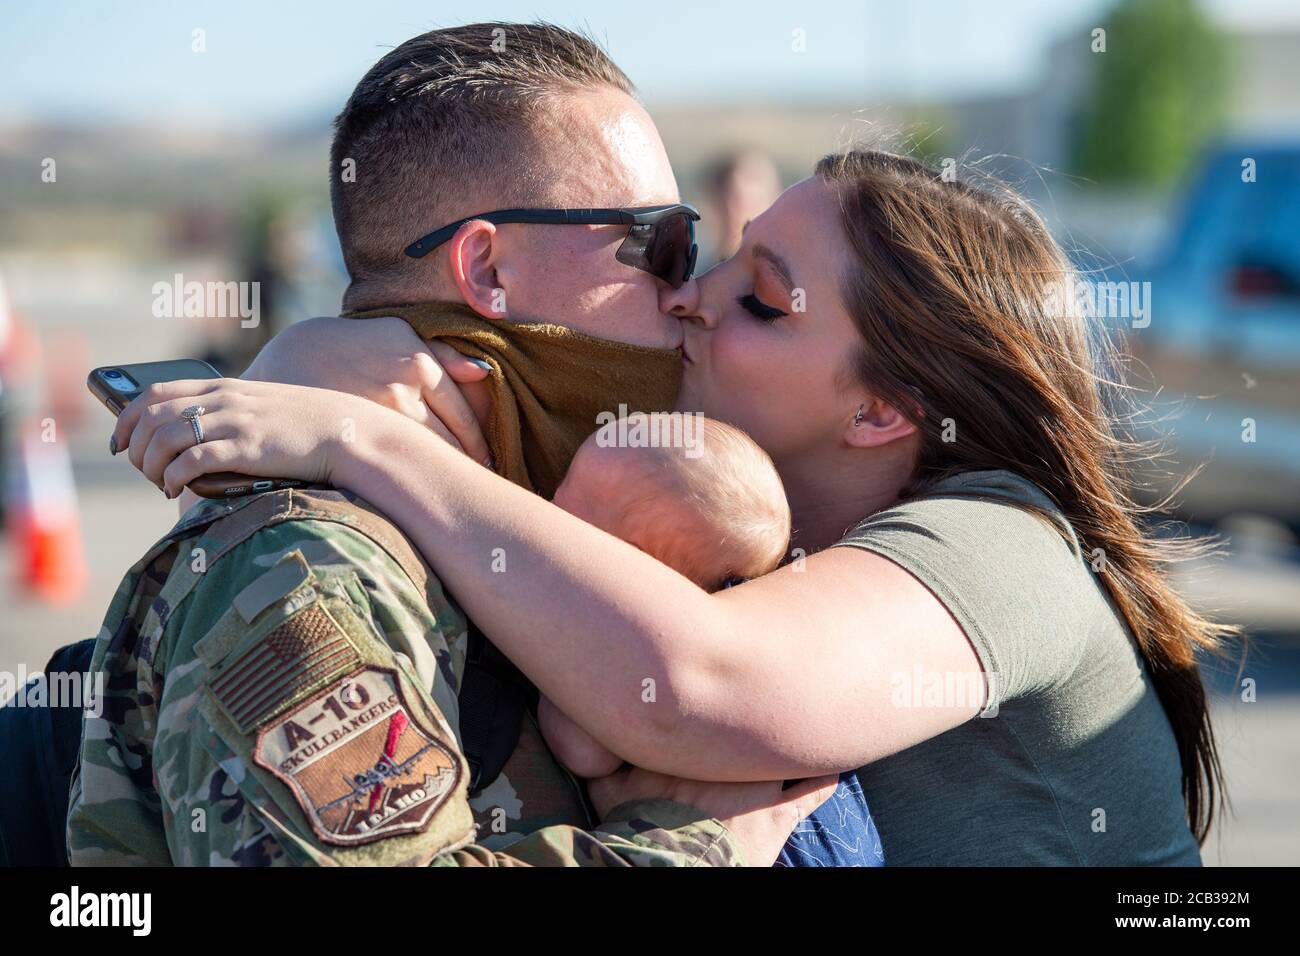 A COVID mask doesn’t stop a welcome home kiss as 124th Fighter Wing Airmen return home from deployment, August 8, 2020, in Boise, Idaho. (USA) Stock Photo